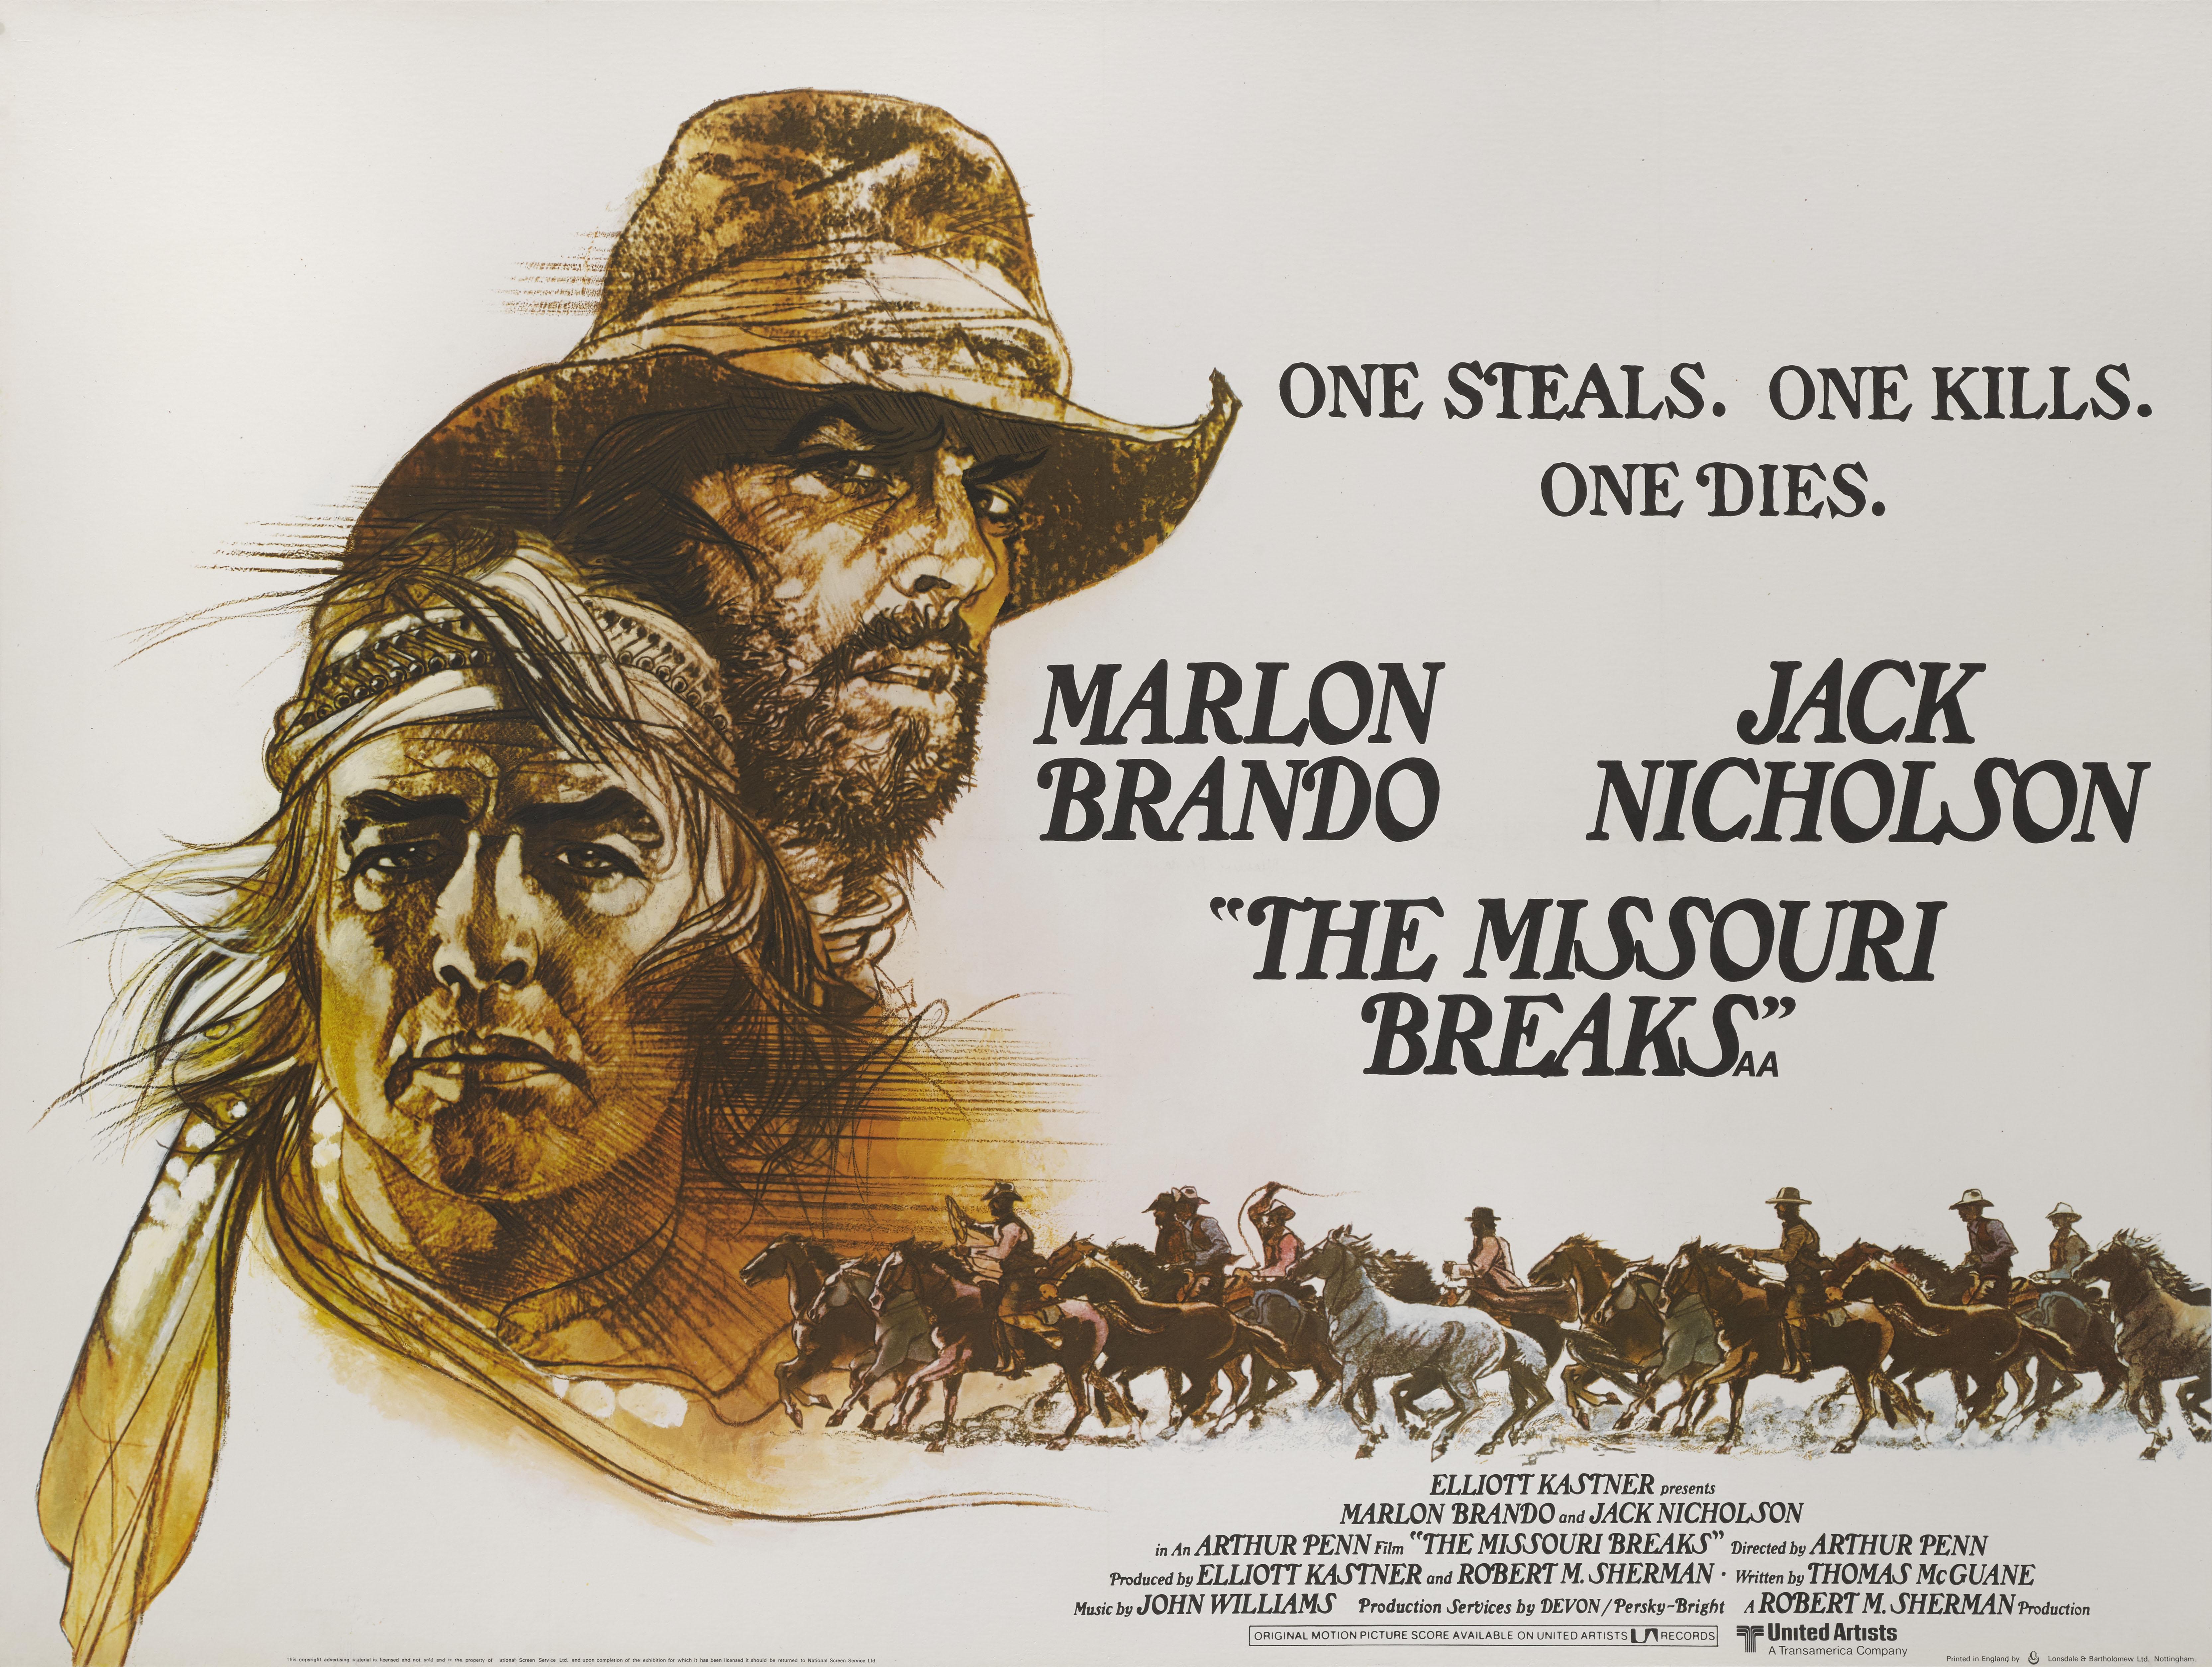 Original British film poster for the 1976 western film The Missouri Breaks. This film was directed by Arthur Penn and starred Marlon Brando and Jack The artwork is by the American illustrator Bob Peak (1927-1992)
This poster is conservation linen